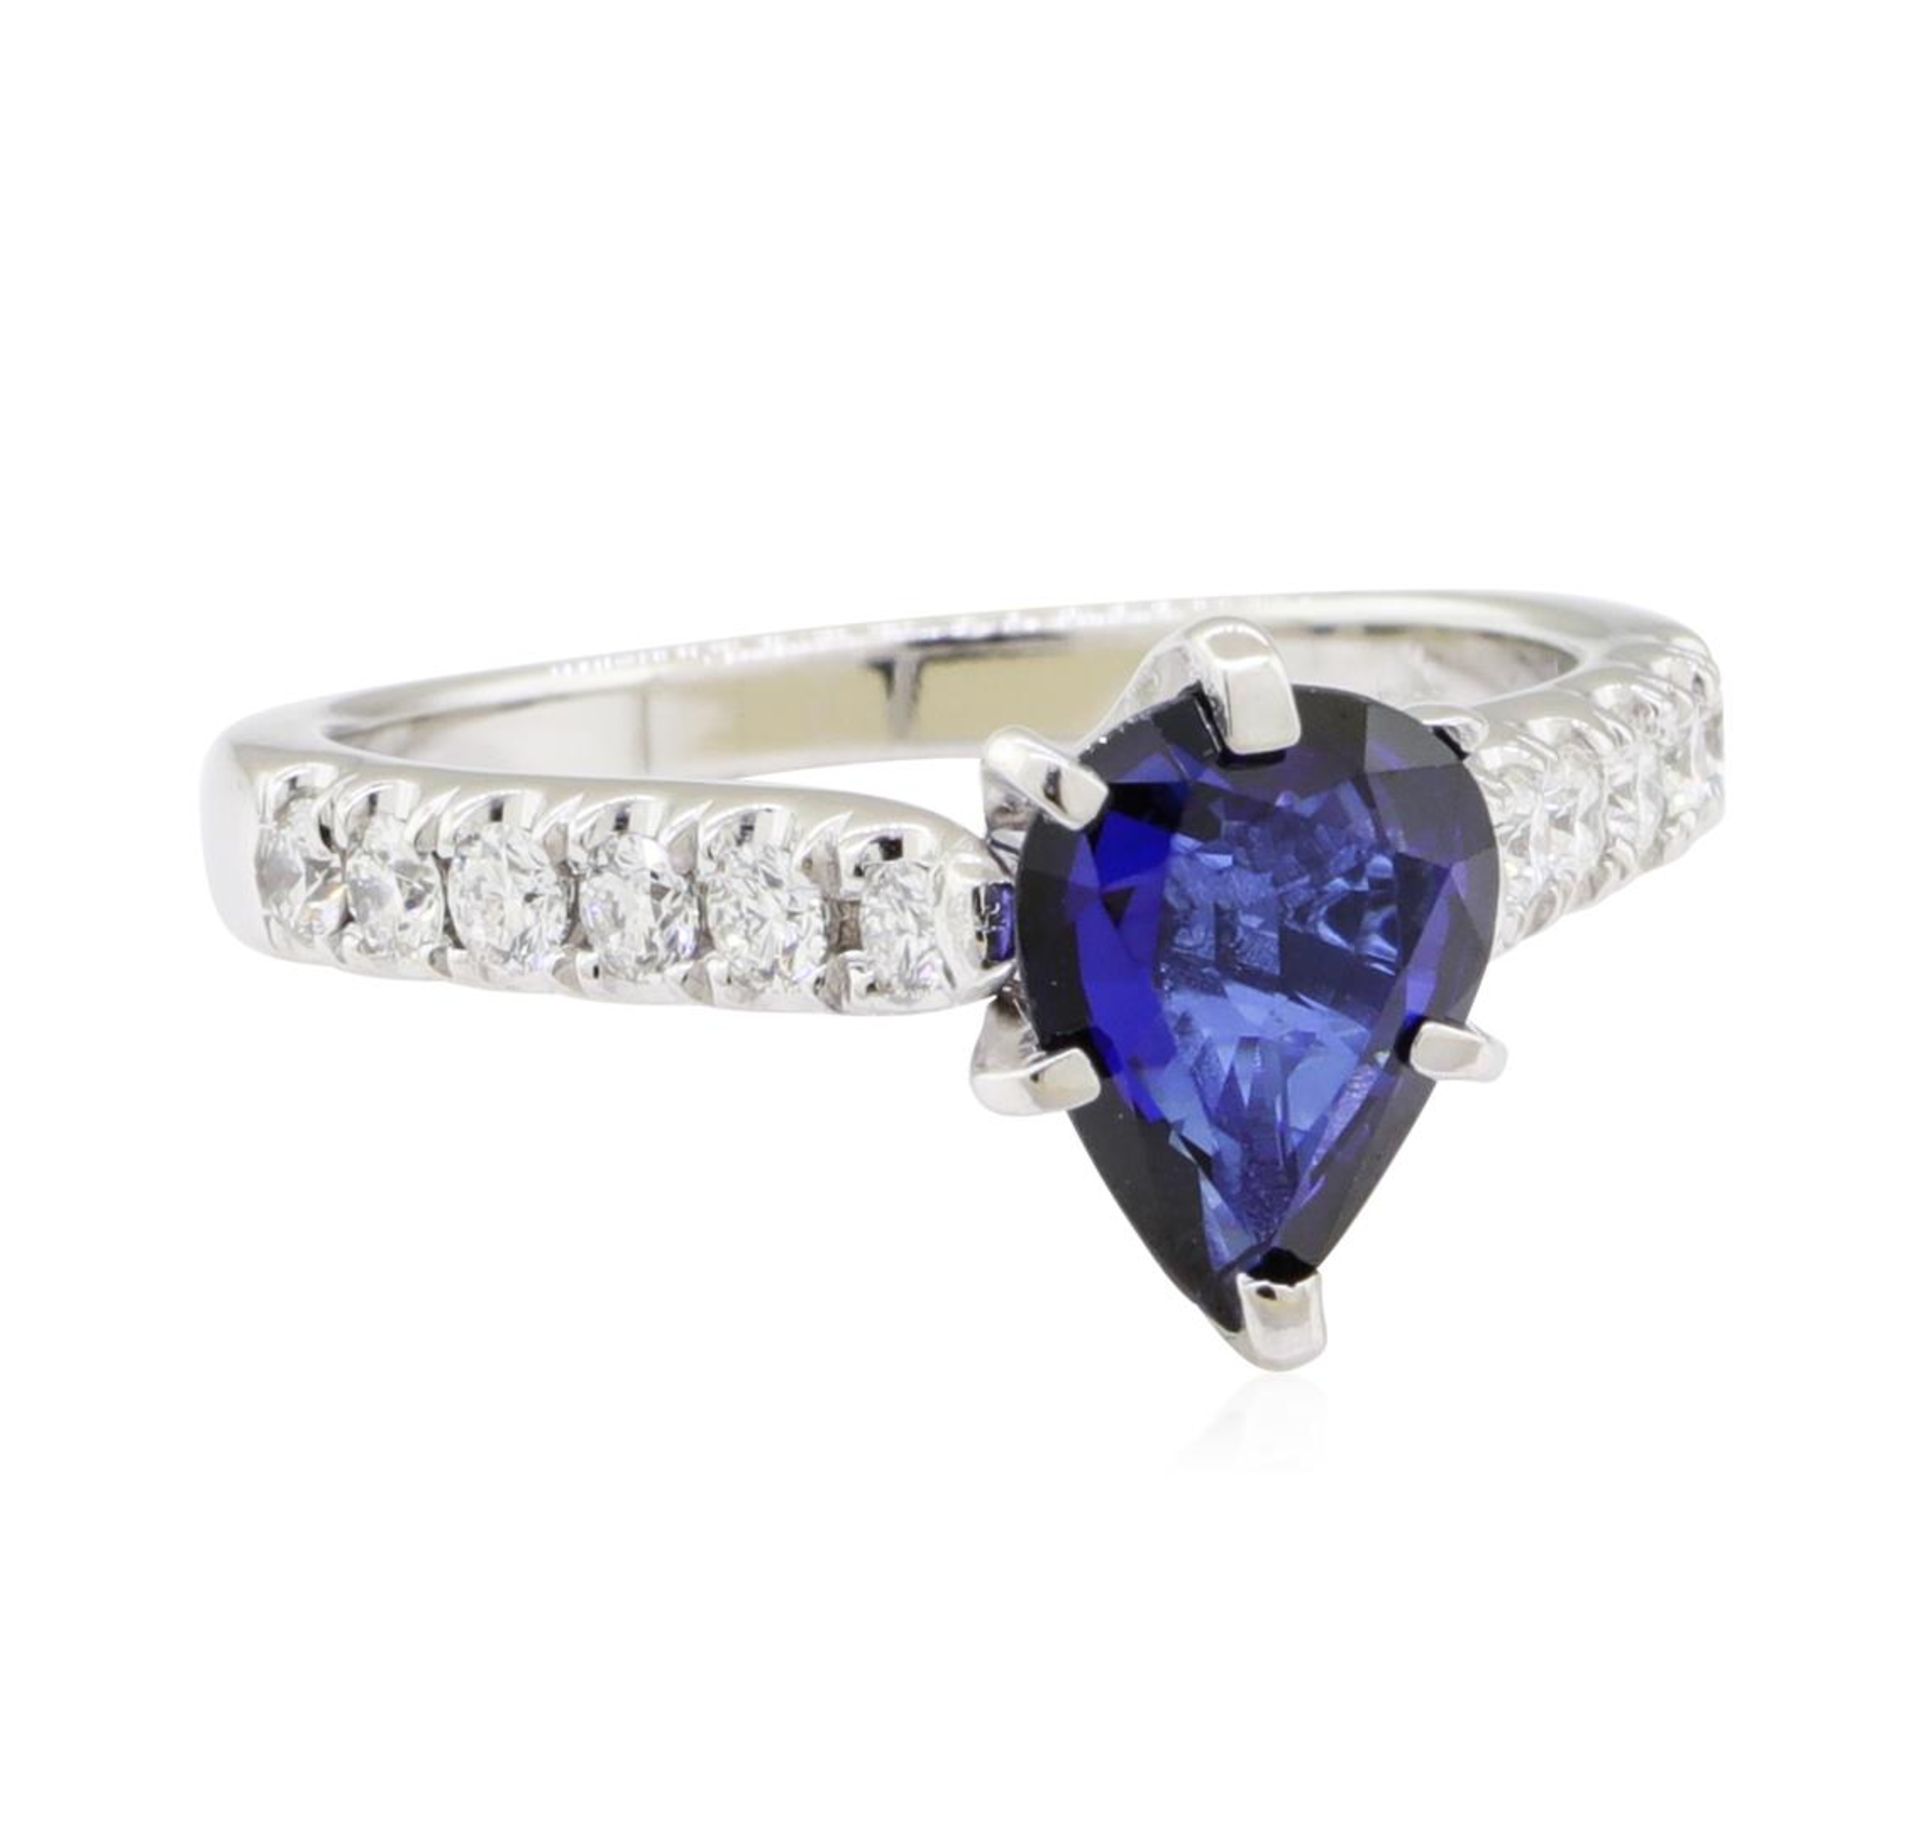 1.99 ctw Sapphire and Diamond Ring - 14KT White Gold